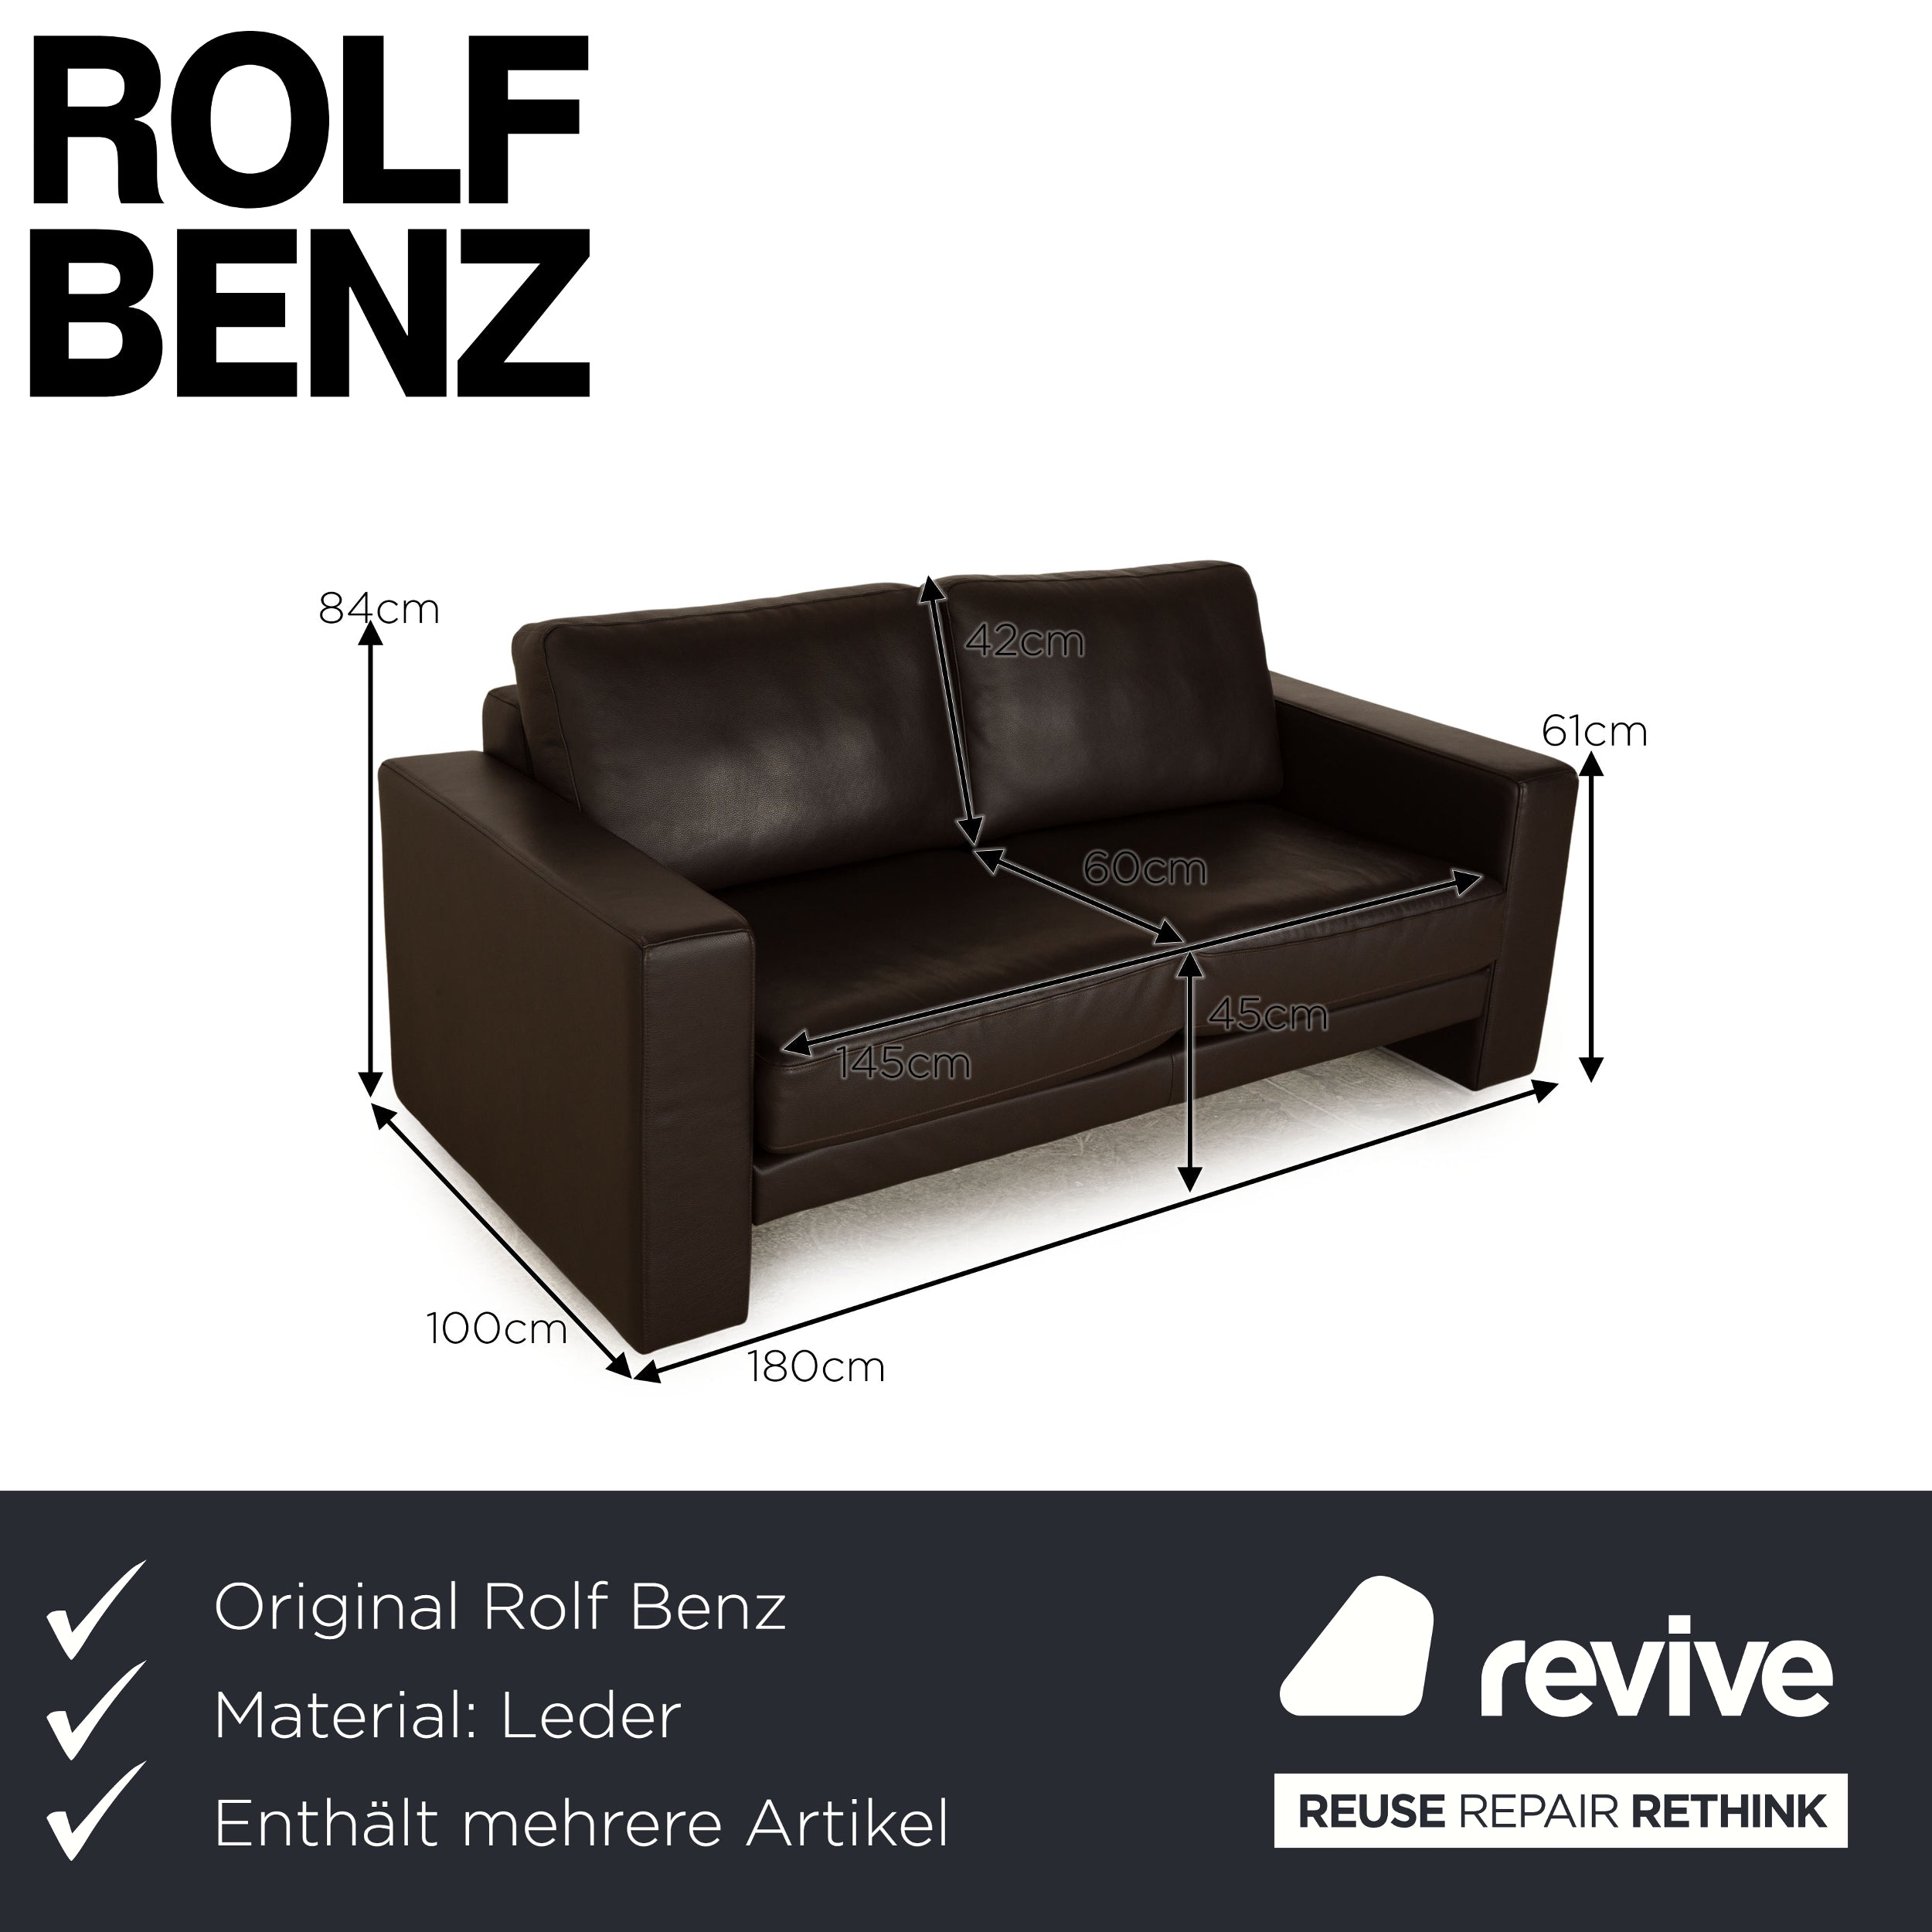 Rolf Benz EGO leather sofa set dark brown three-seater sofa couch